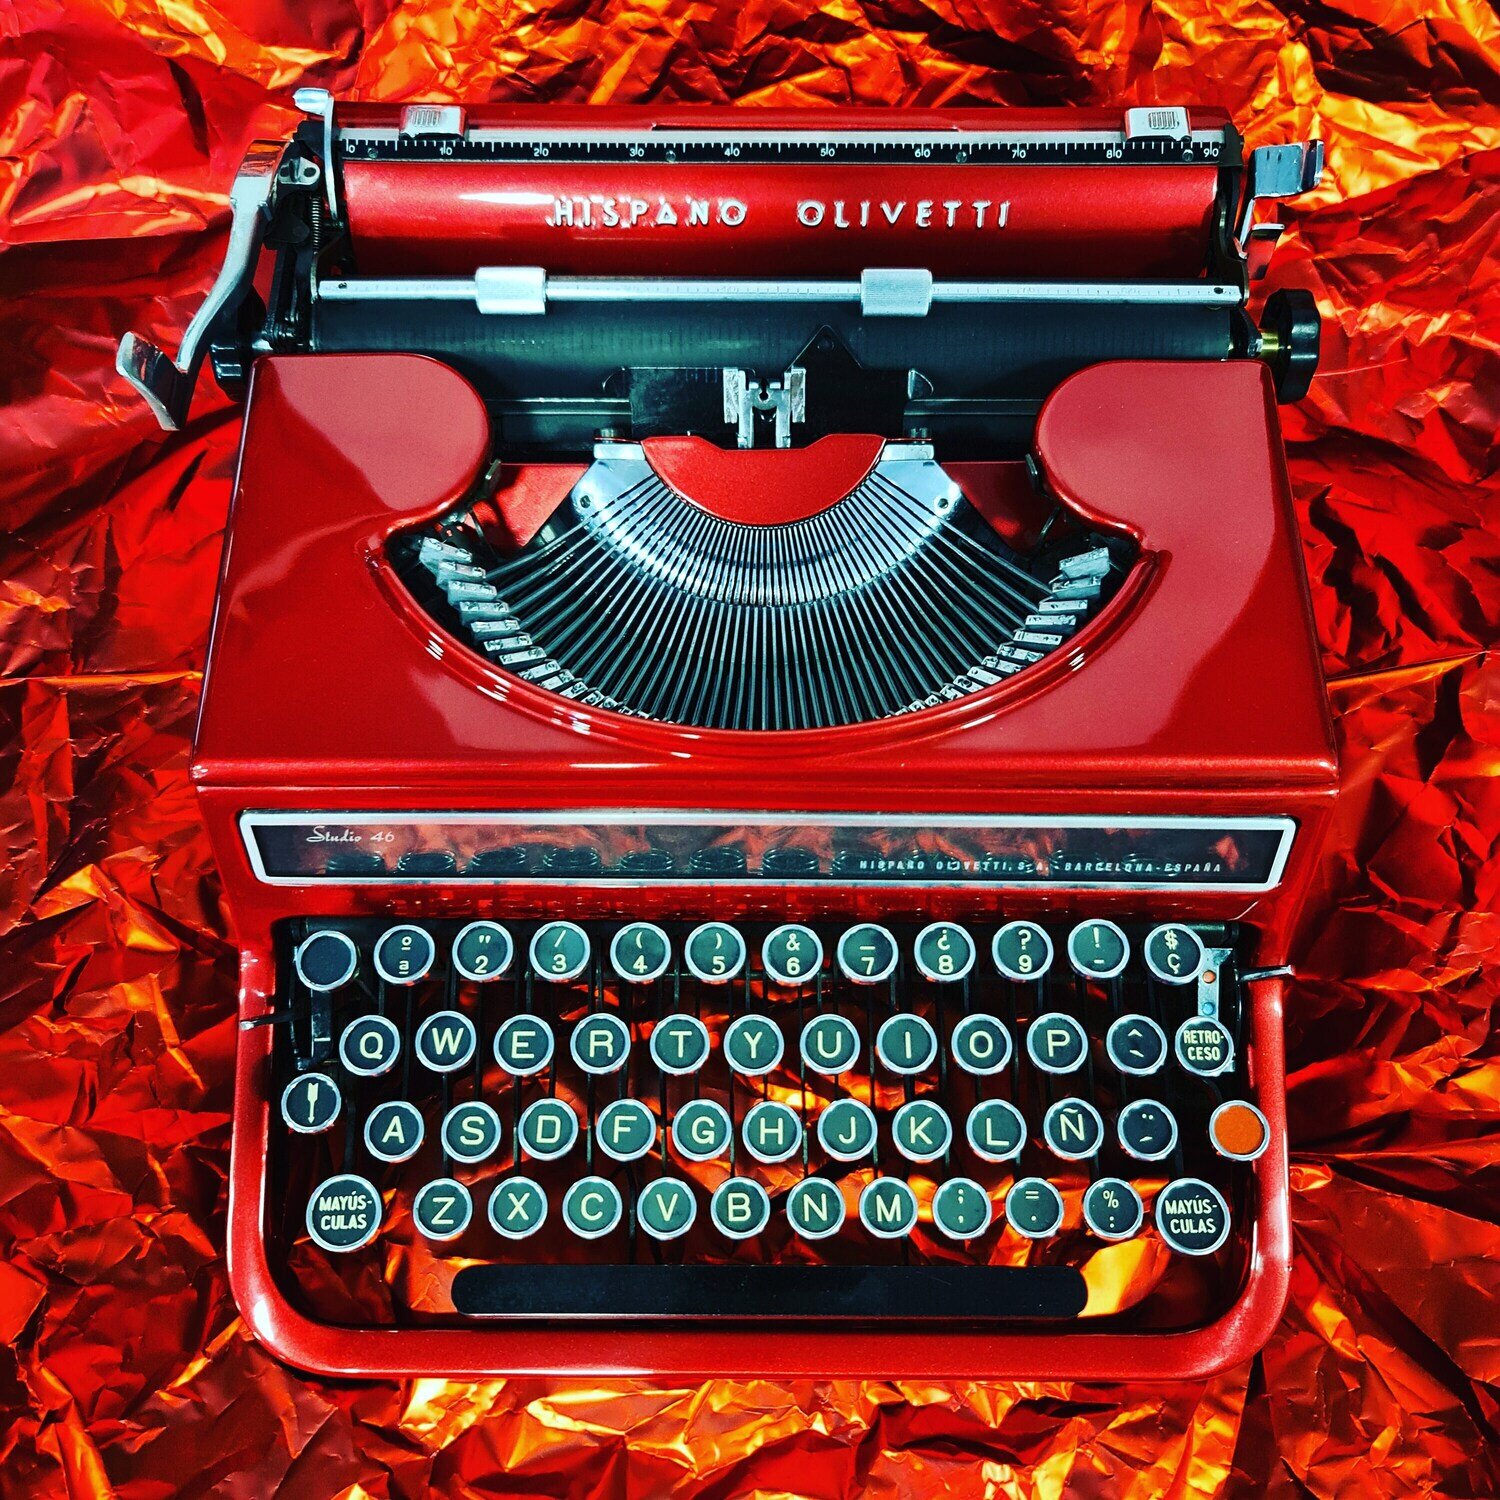 Limited Edition Olivetti Studio 46 (42) Exclusive Red Typewriter, Vintage, Manual Portable, Professionally Serviced by Typewriter.Company